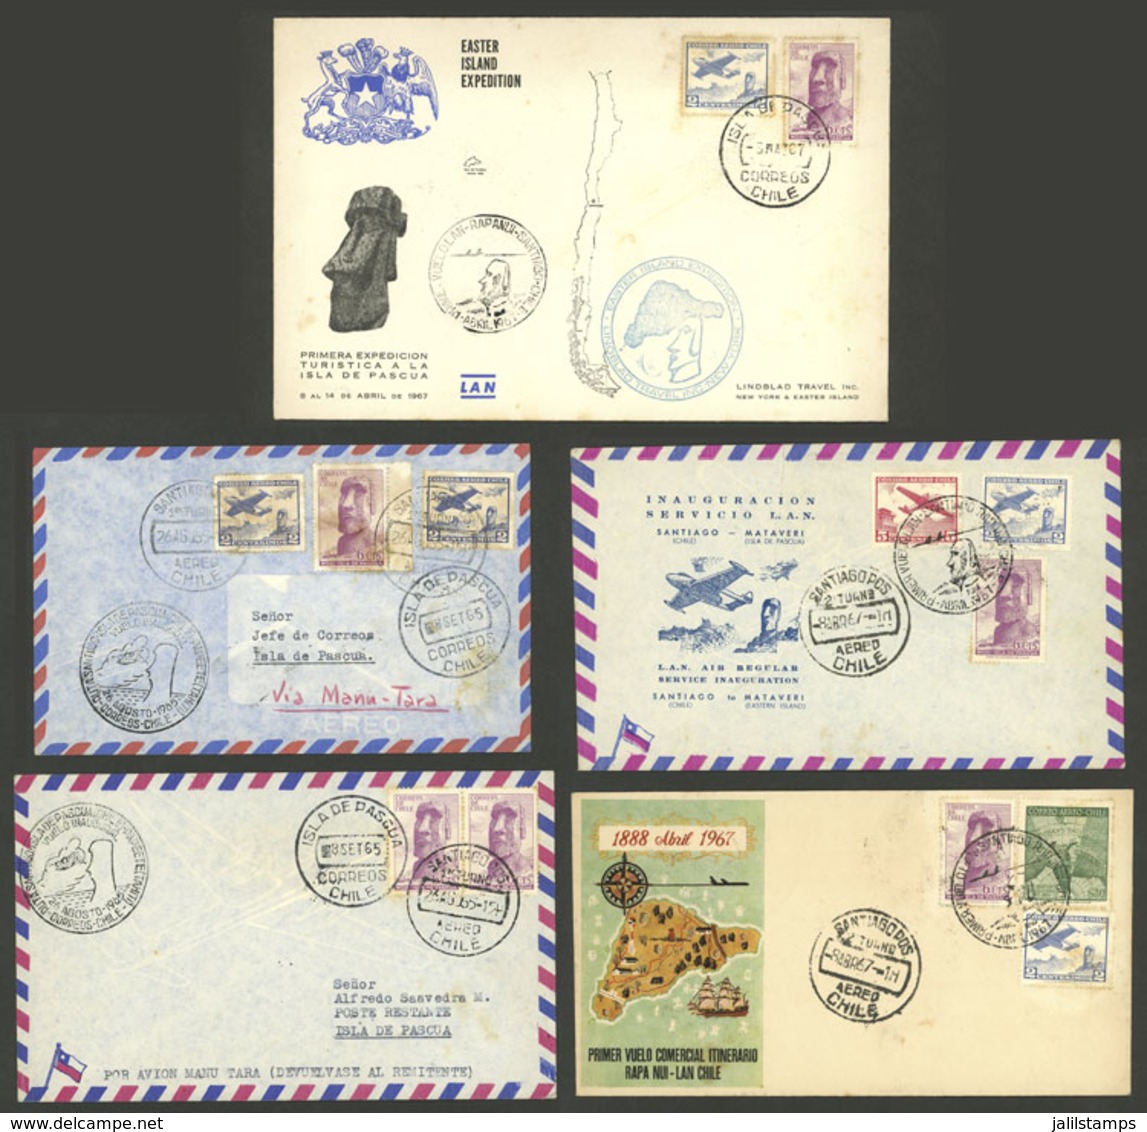 CHILE: Flights To EASTER ISLAND: 5 Covers Sent From Santiago To Rapanui Or The Other Way Around In 1967, Several Are LAN - Cile